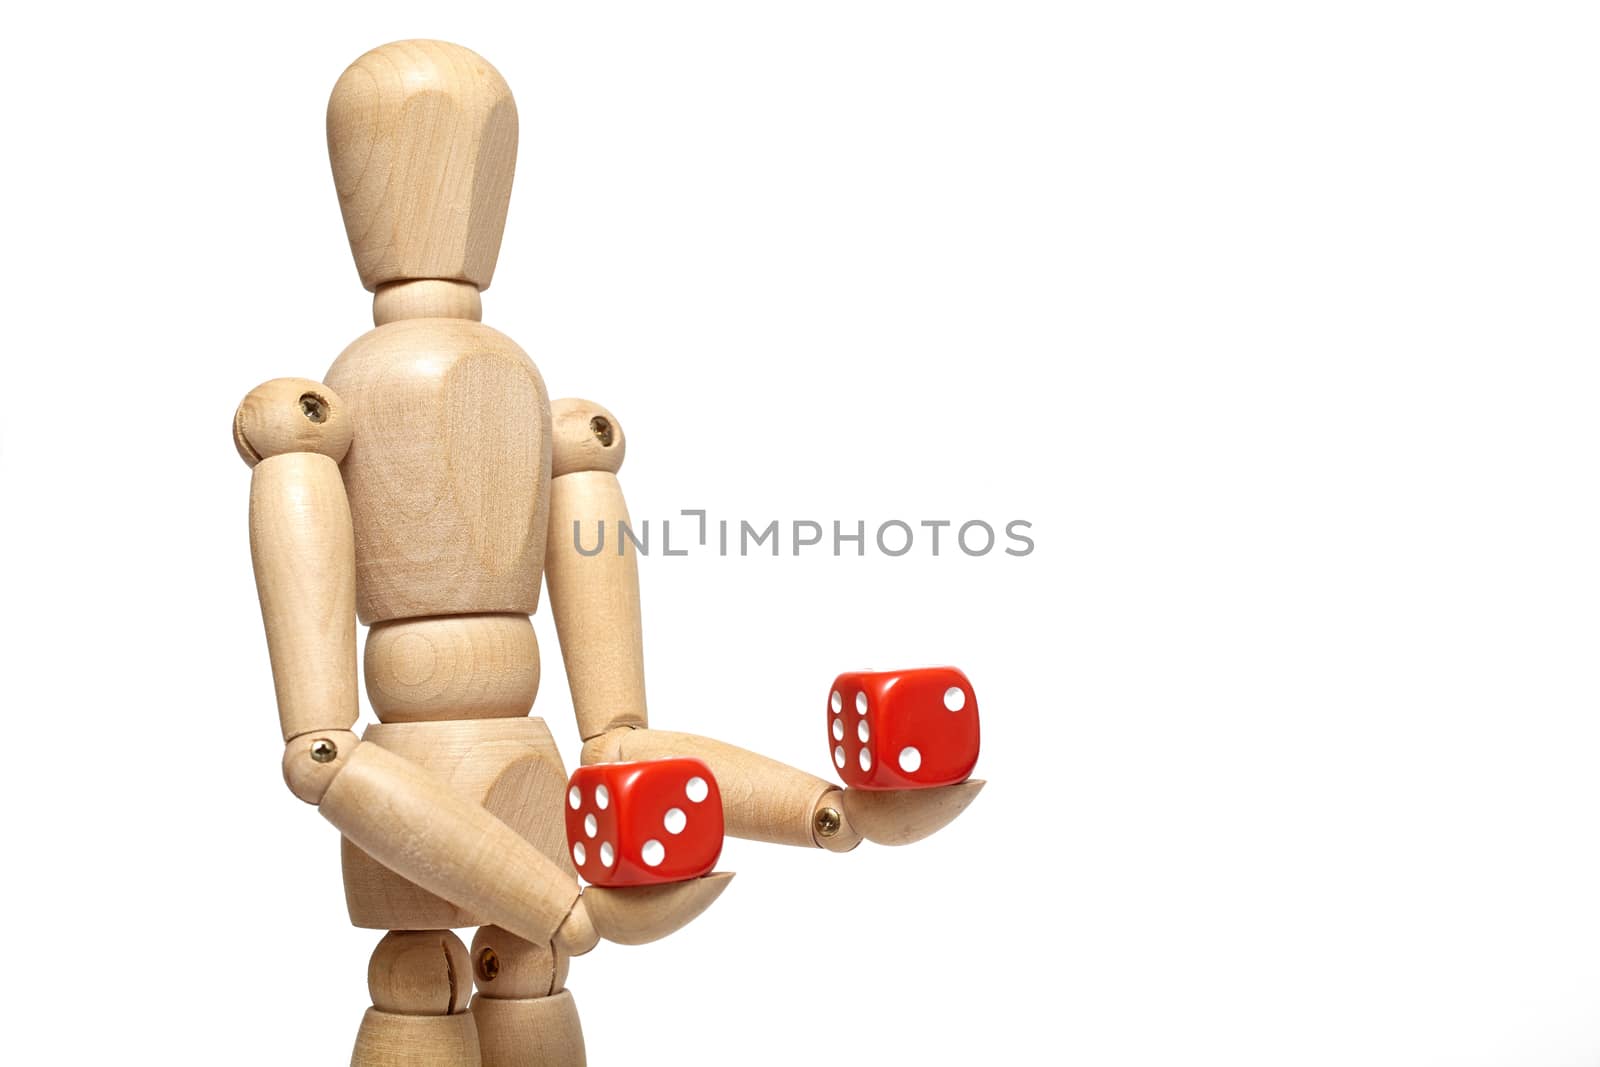 Wooden puppet with dice by Portokalis